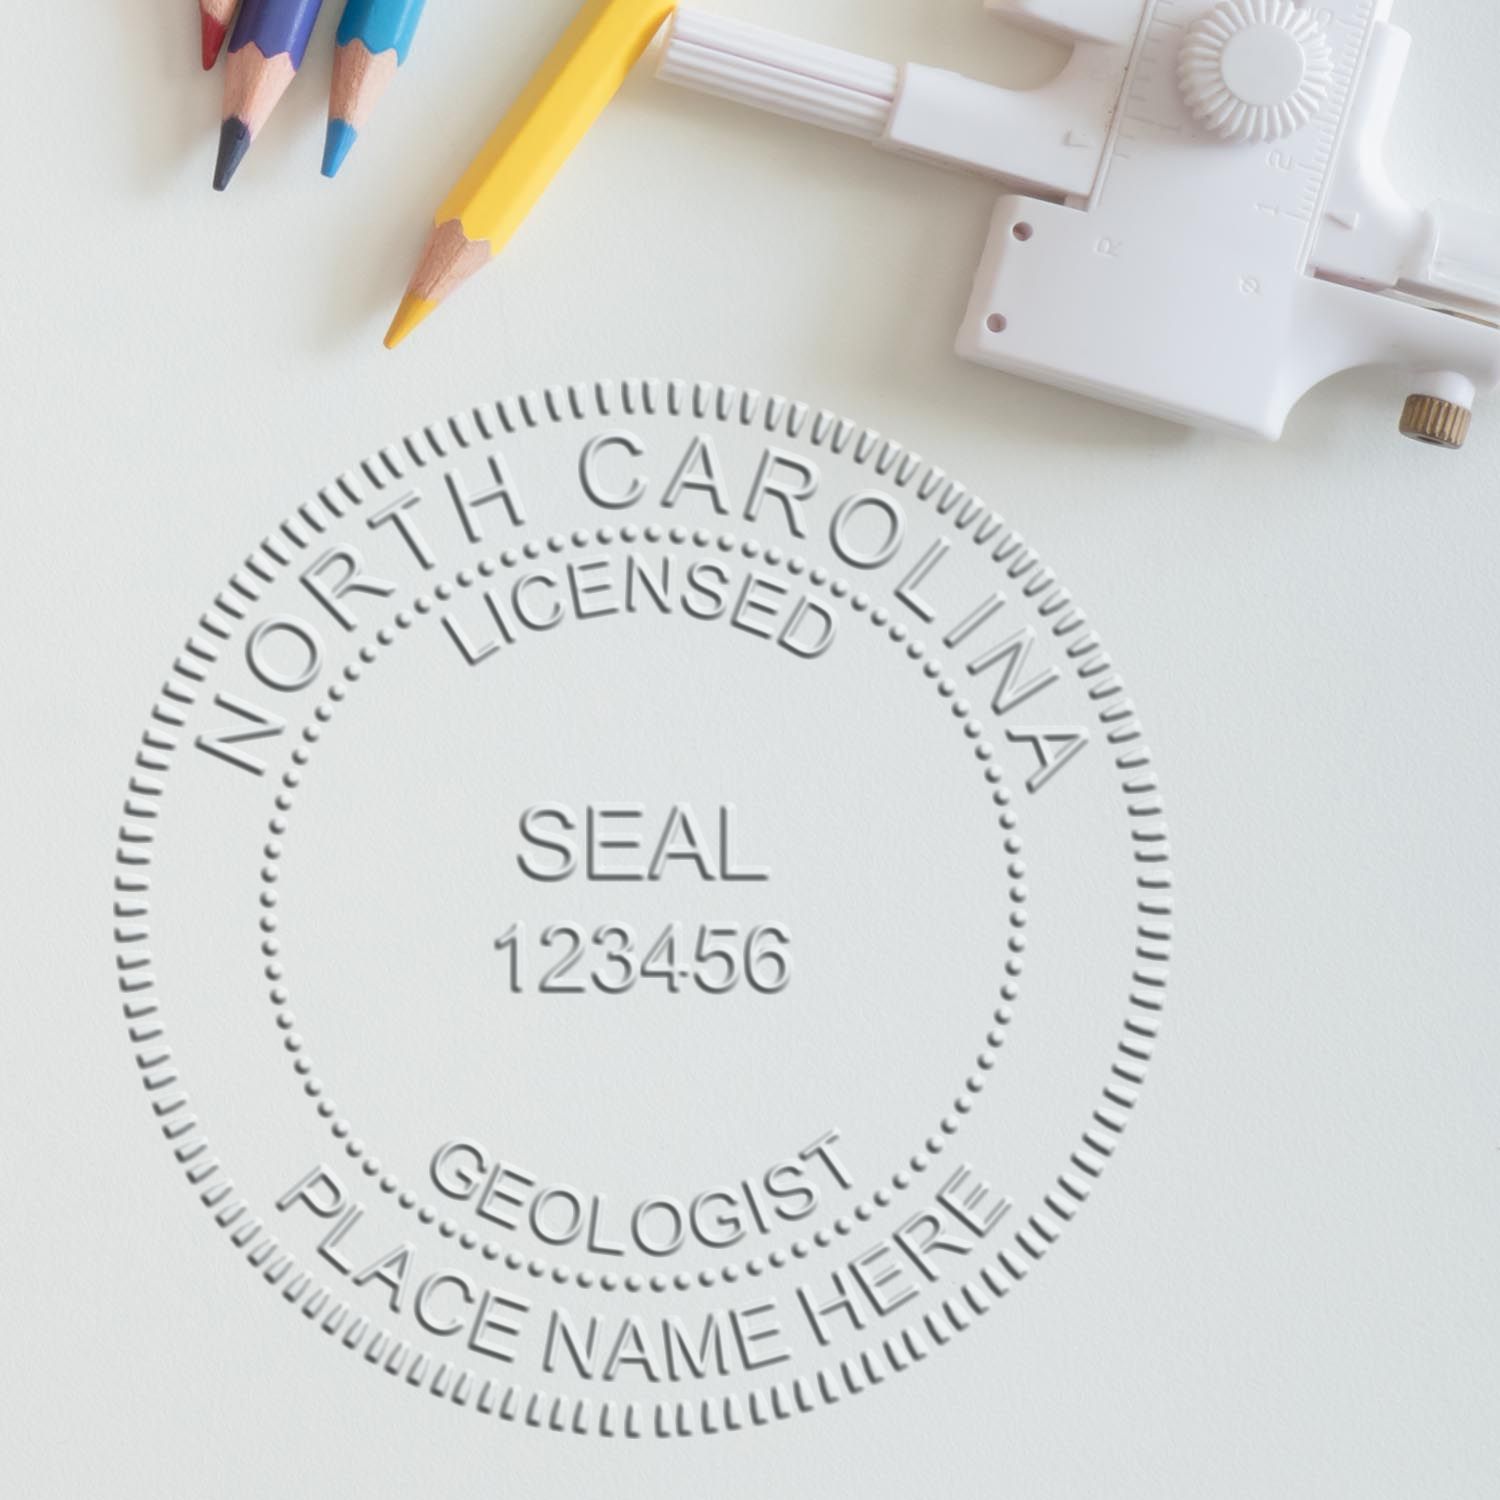 The main image for the State of North Carolina Extended Long Reach Geologist Seal depicting a sample of the imprint and imprint sample